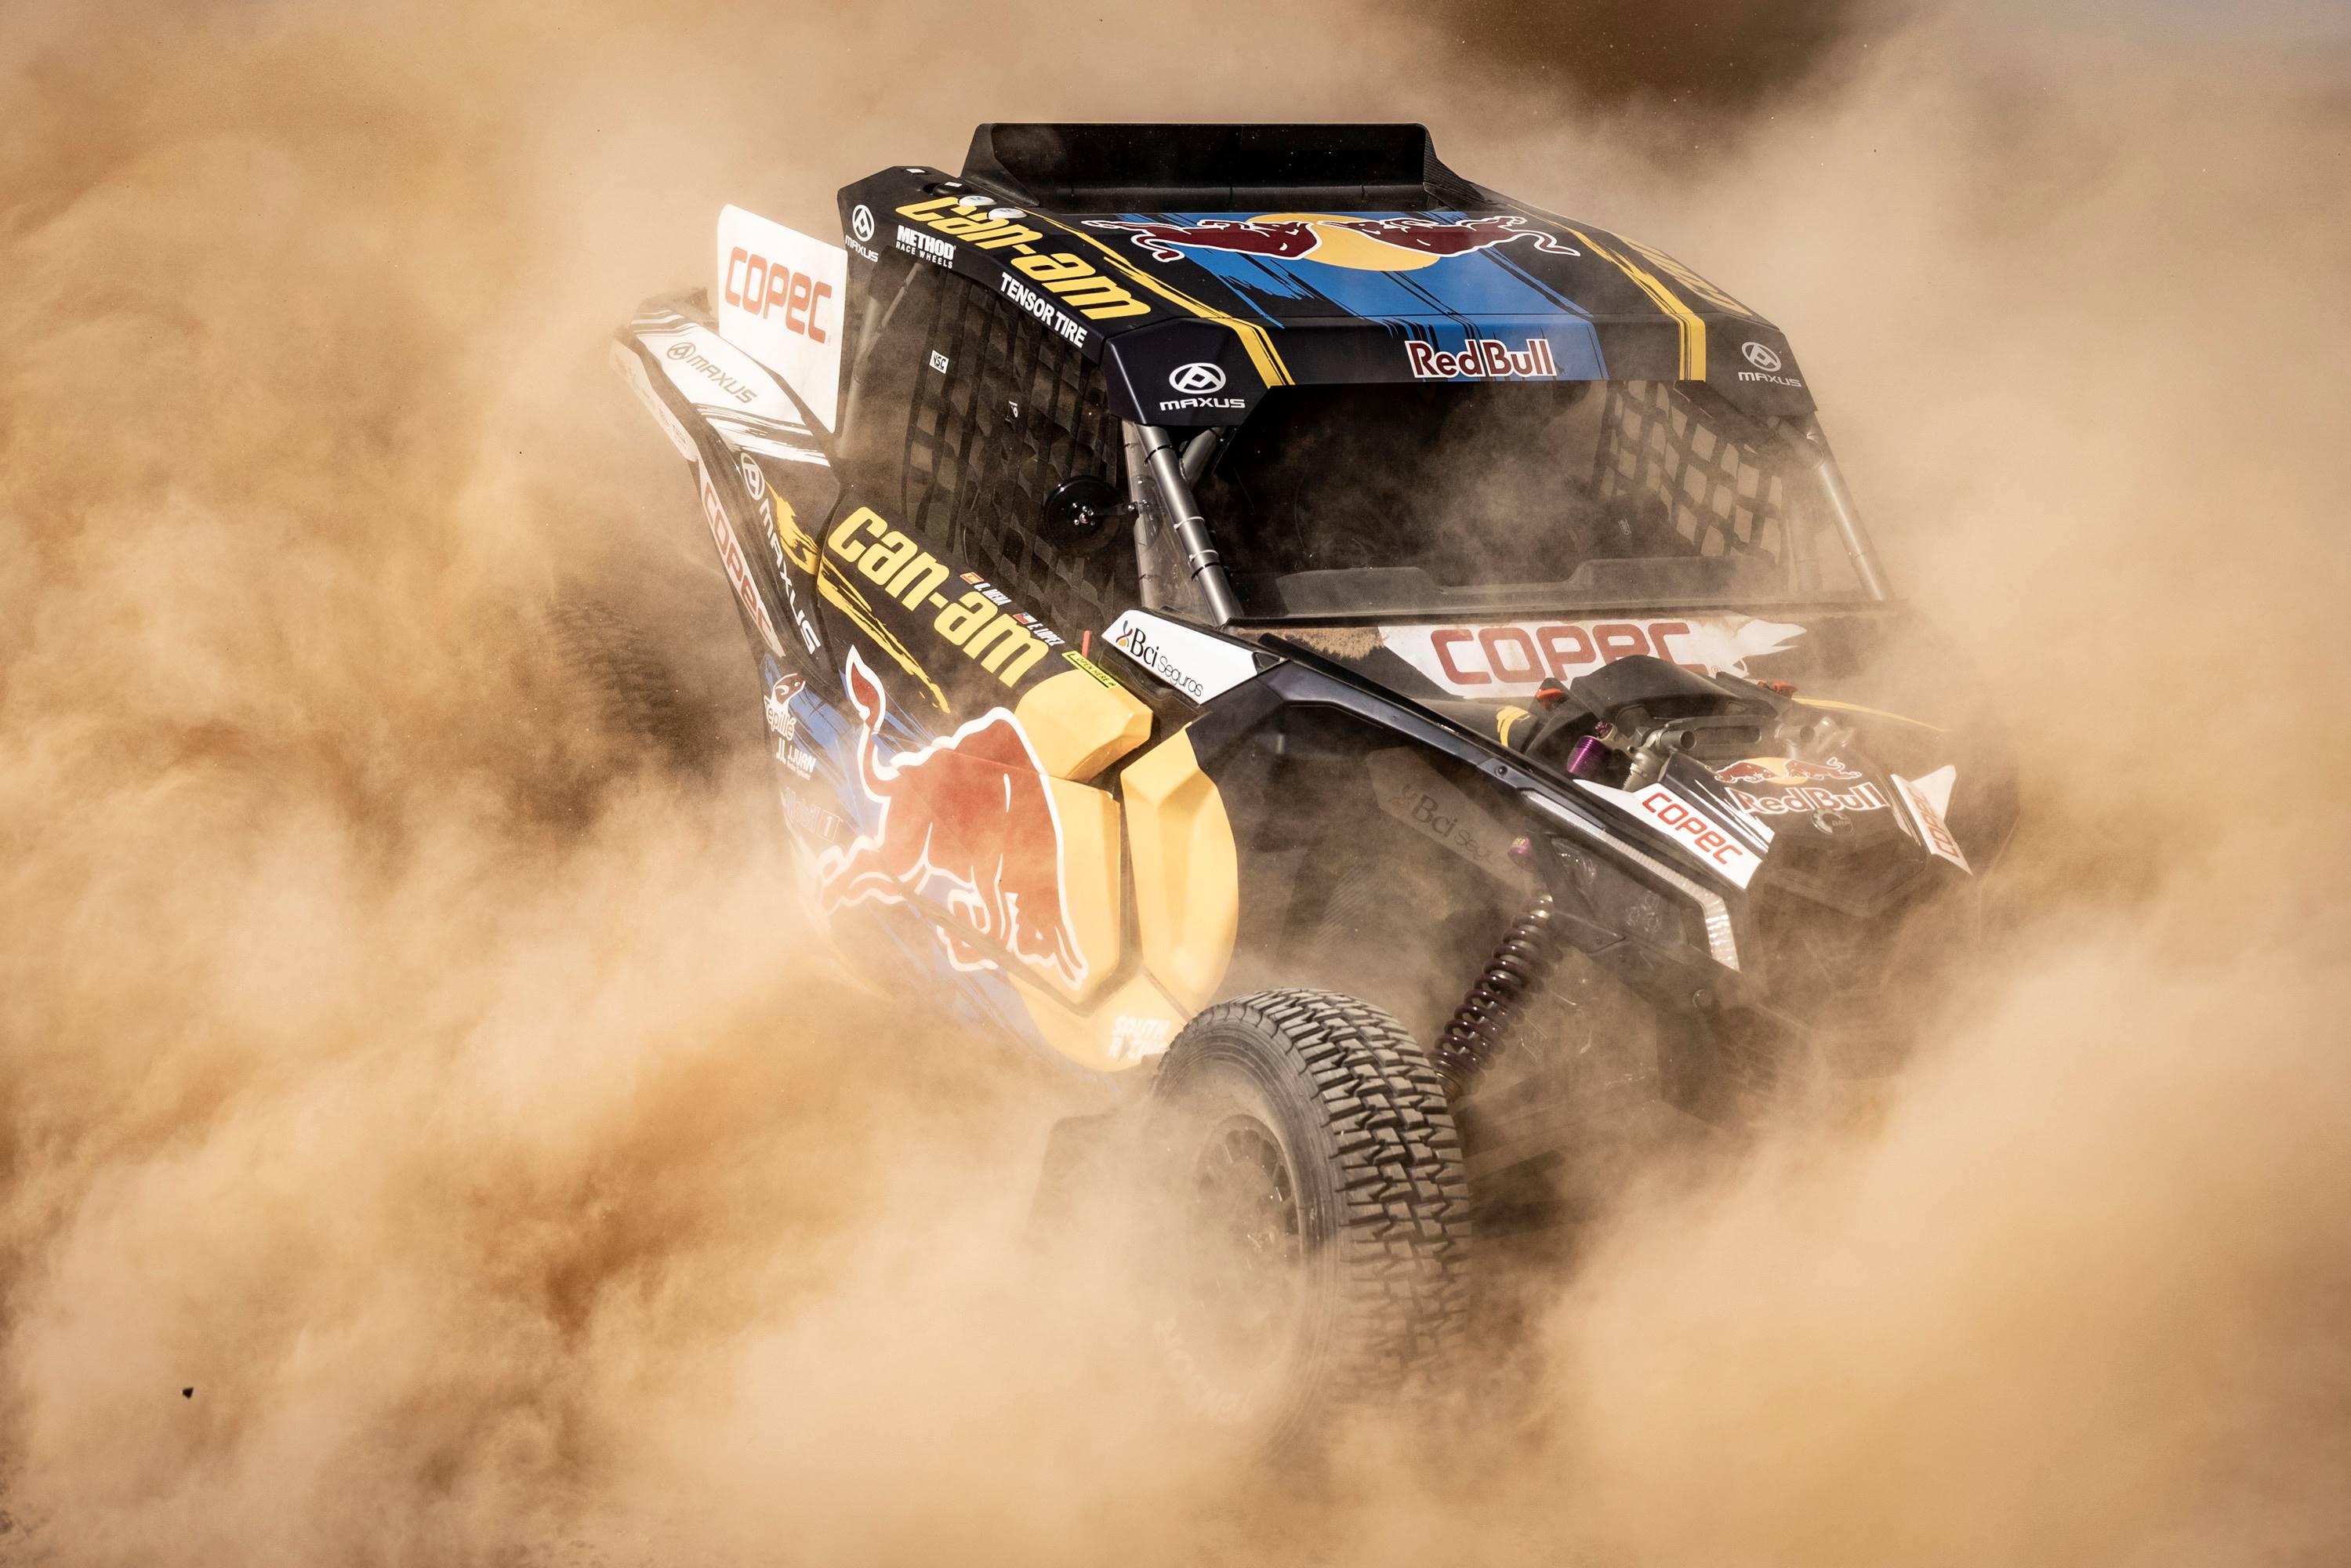 Maverick X3 in the Saudi desert surrounded by dust